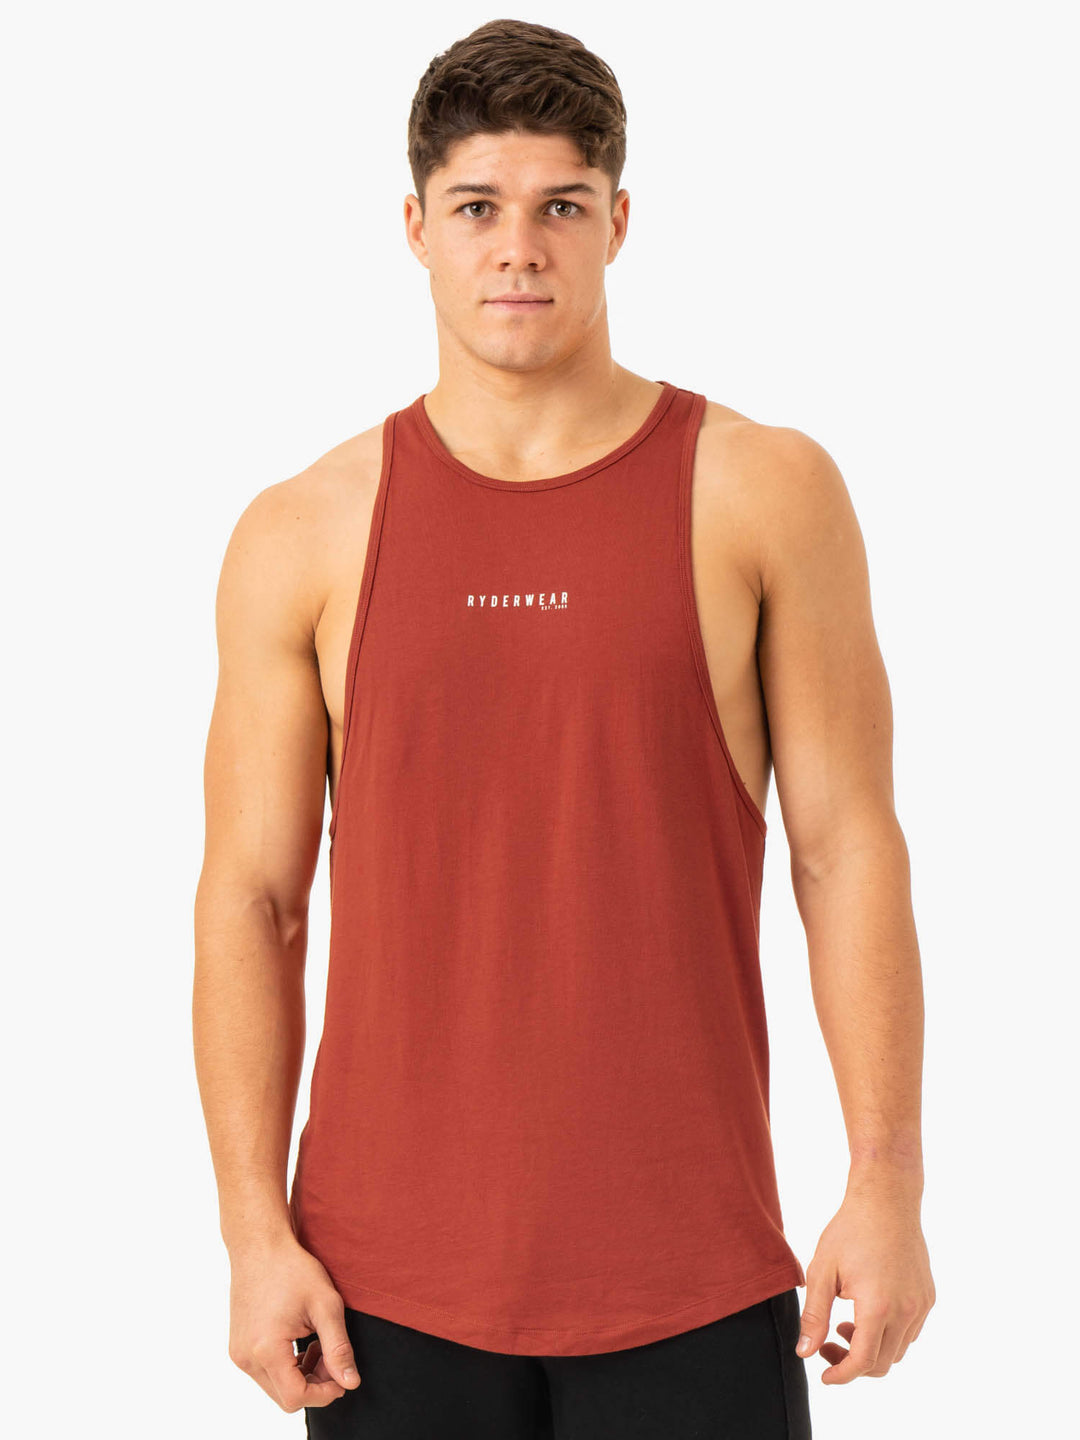 Pursuit Baller Tank - Red Clay Clothing Ryderwear 